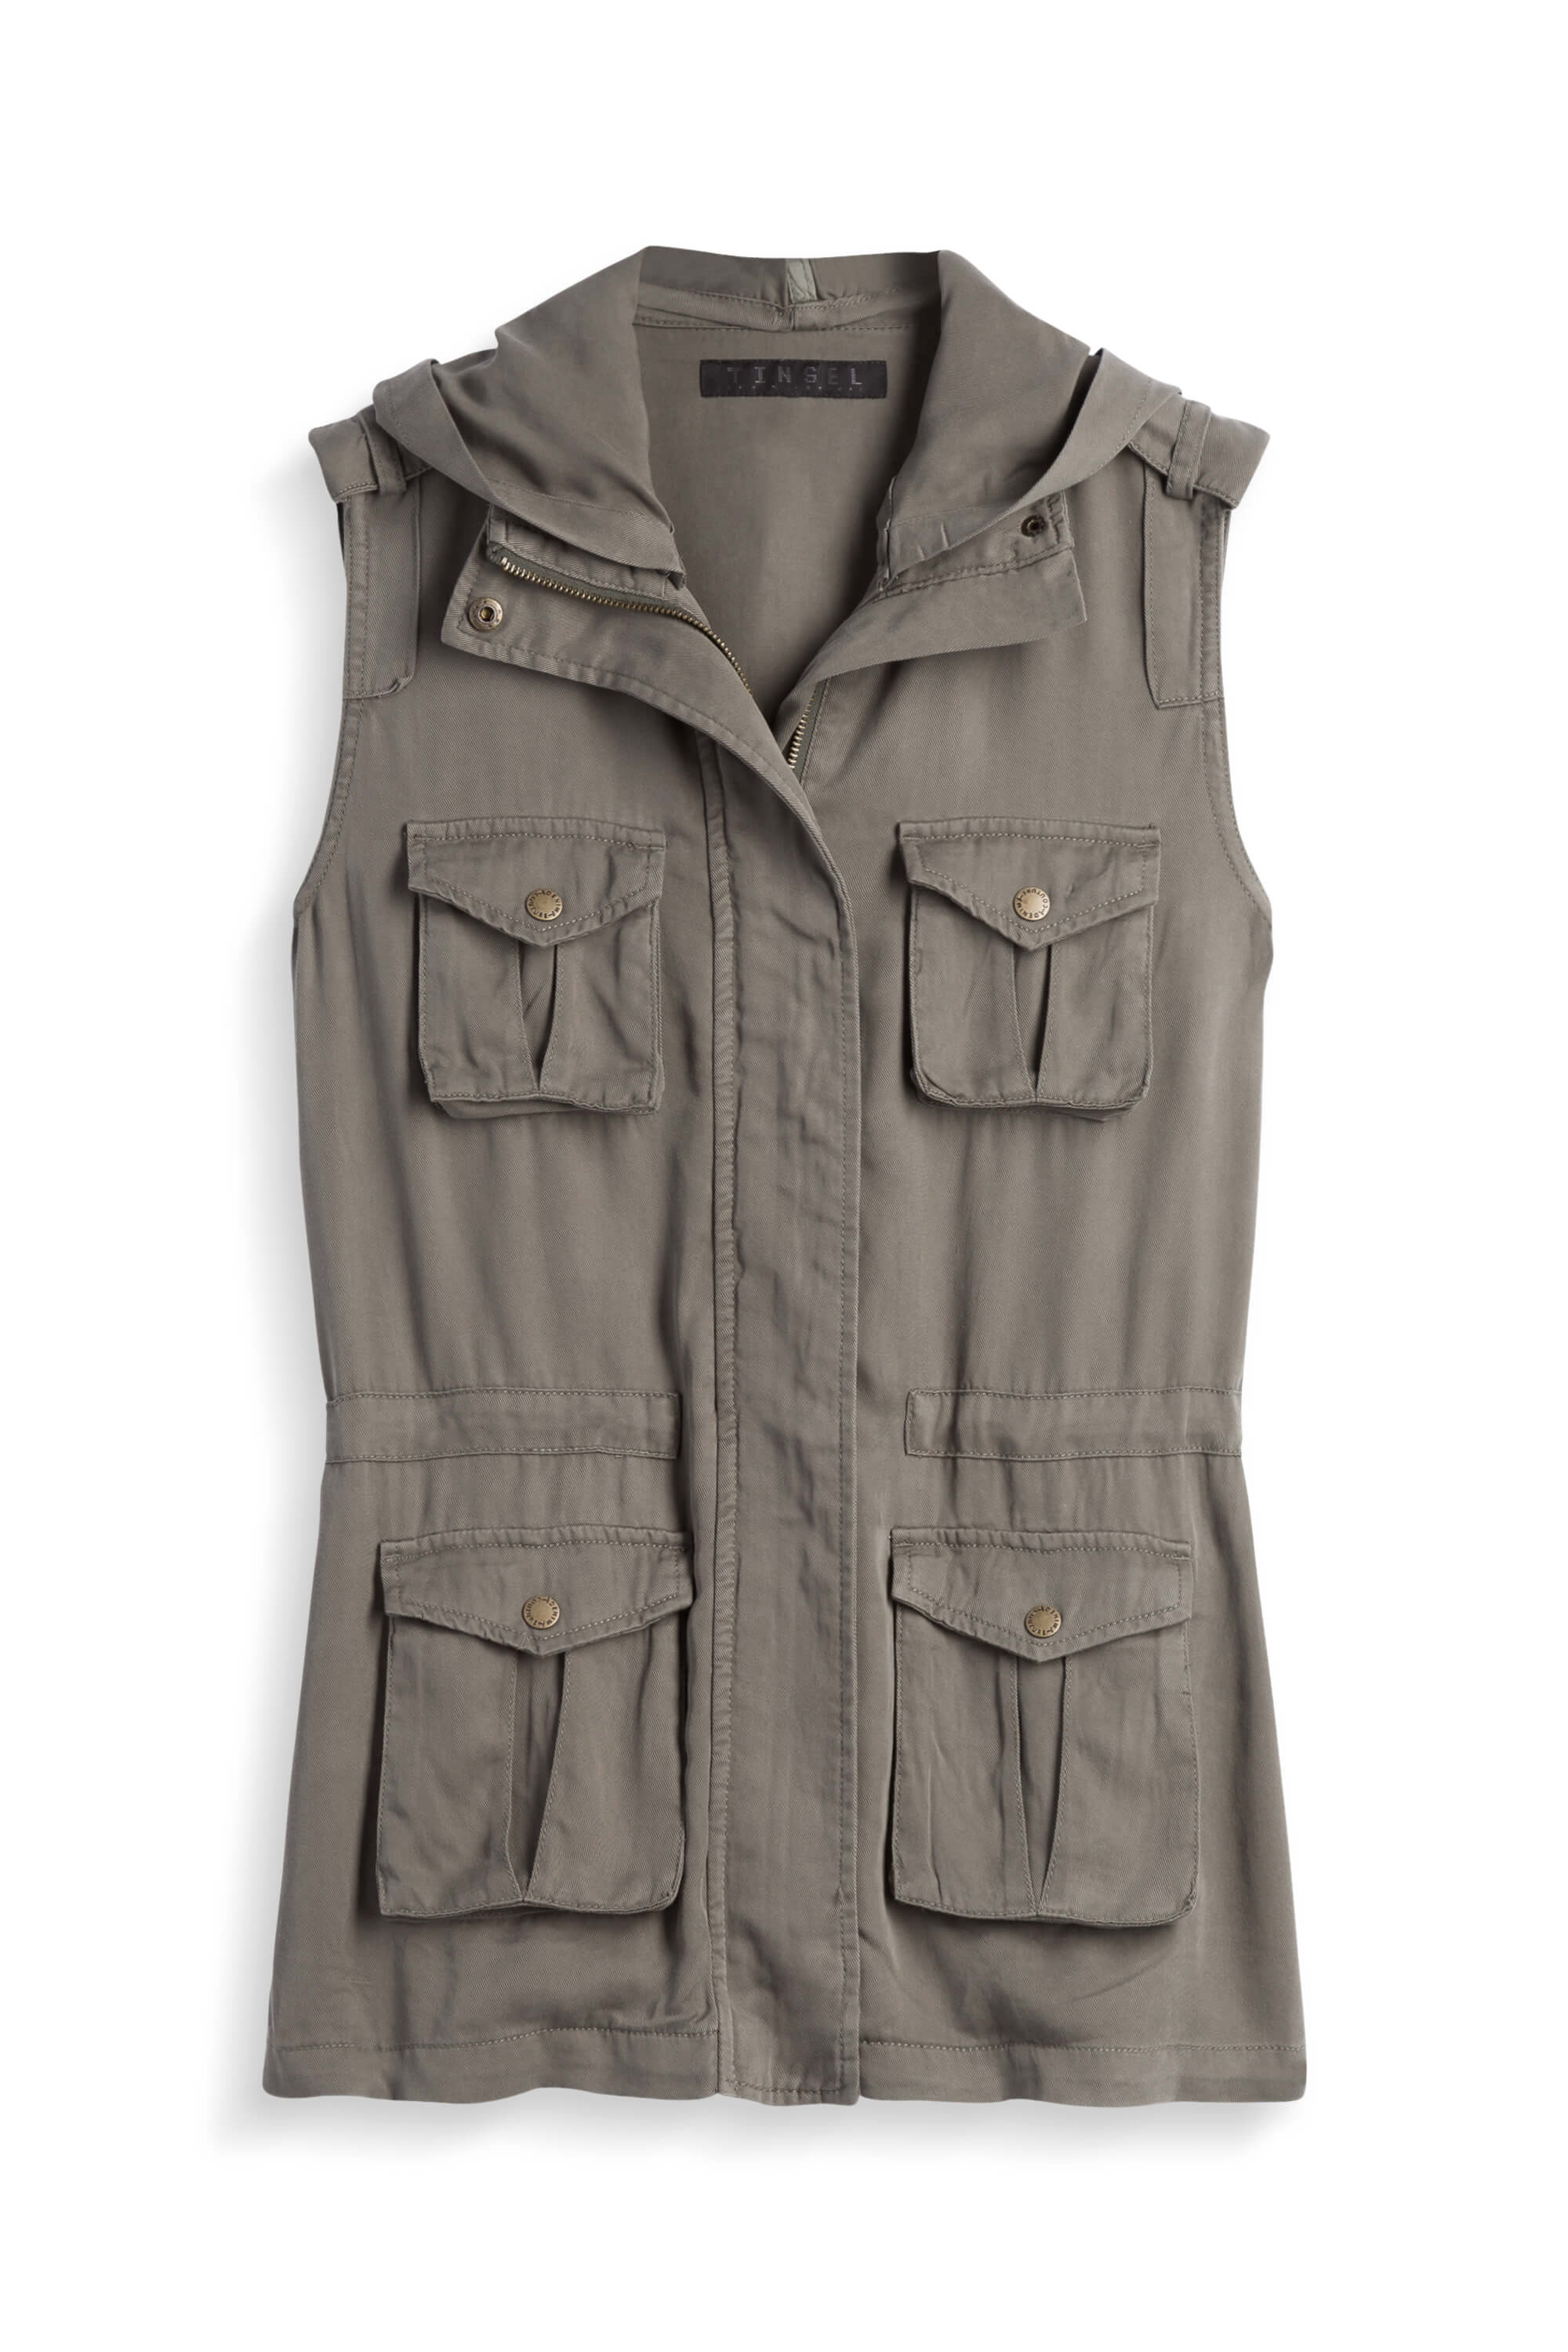 How To Wear A Vest